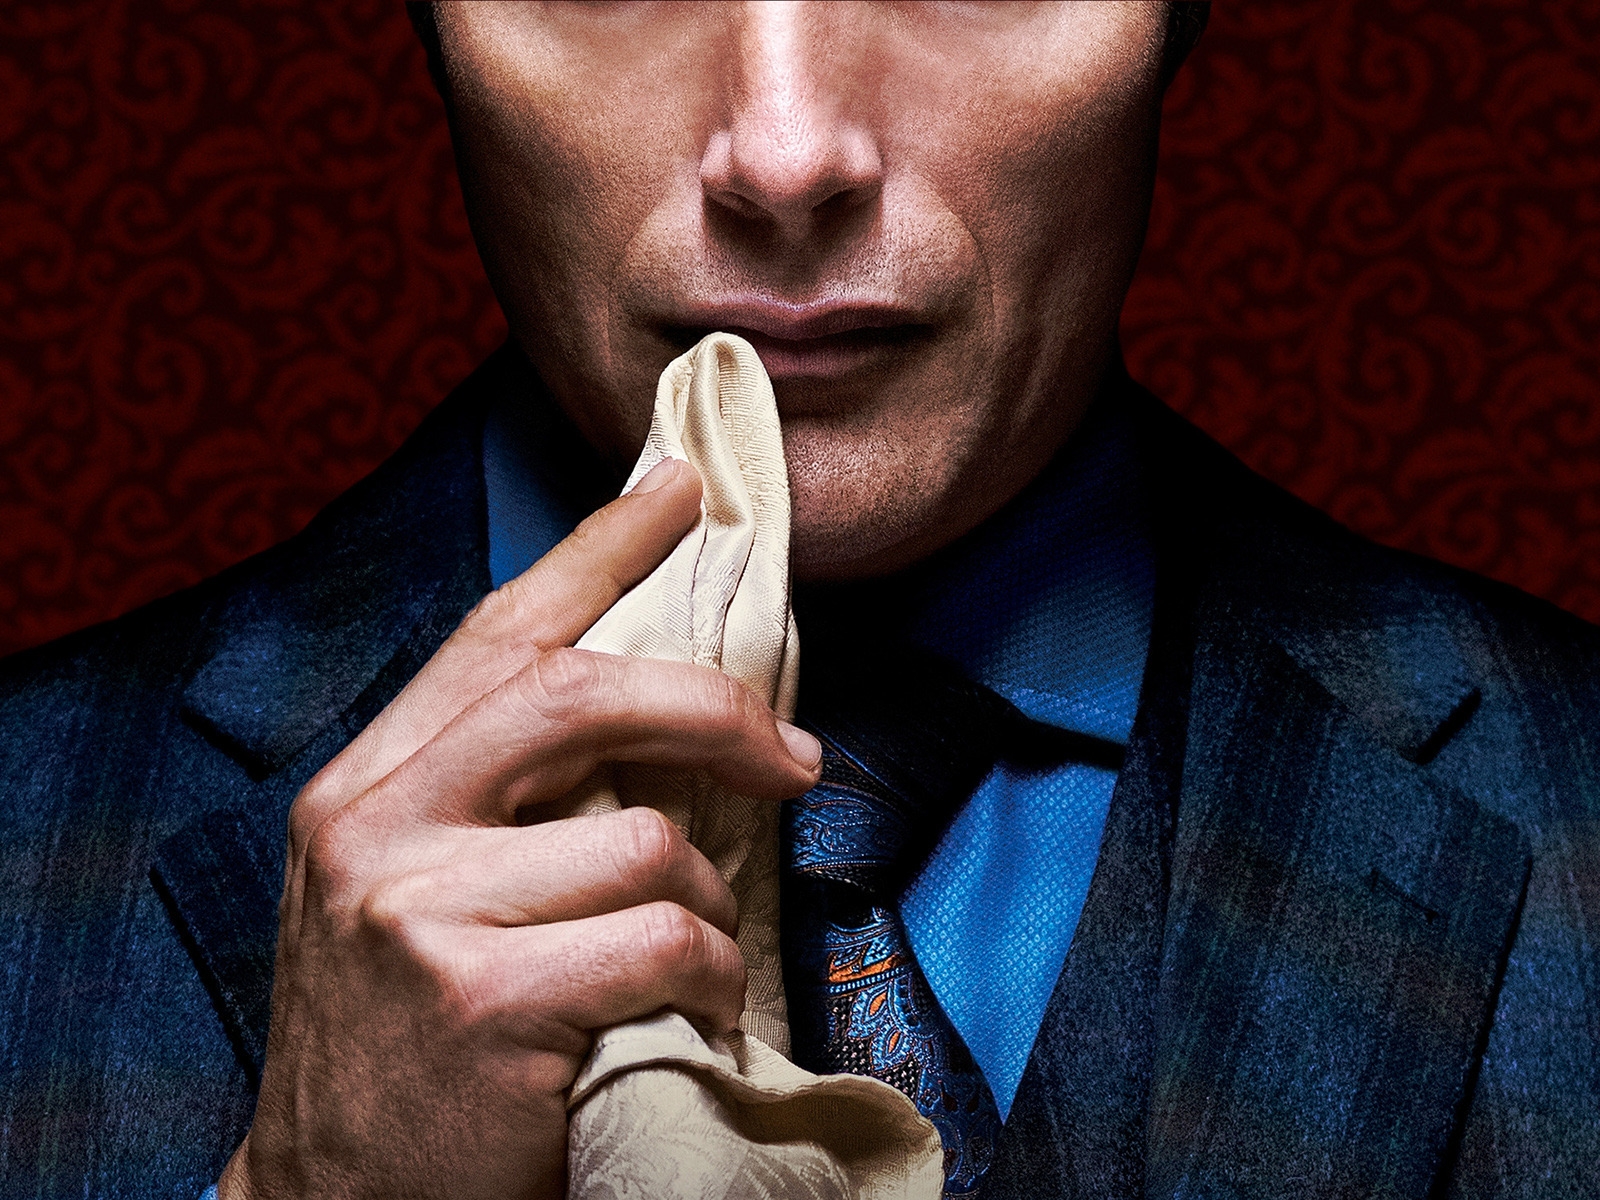 Hannibal Tv Show for 1600 x 1200 resolution